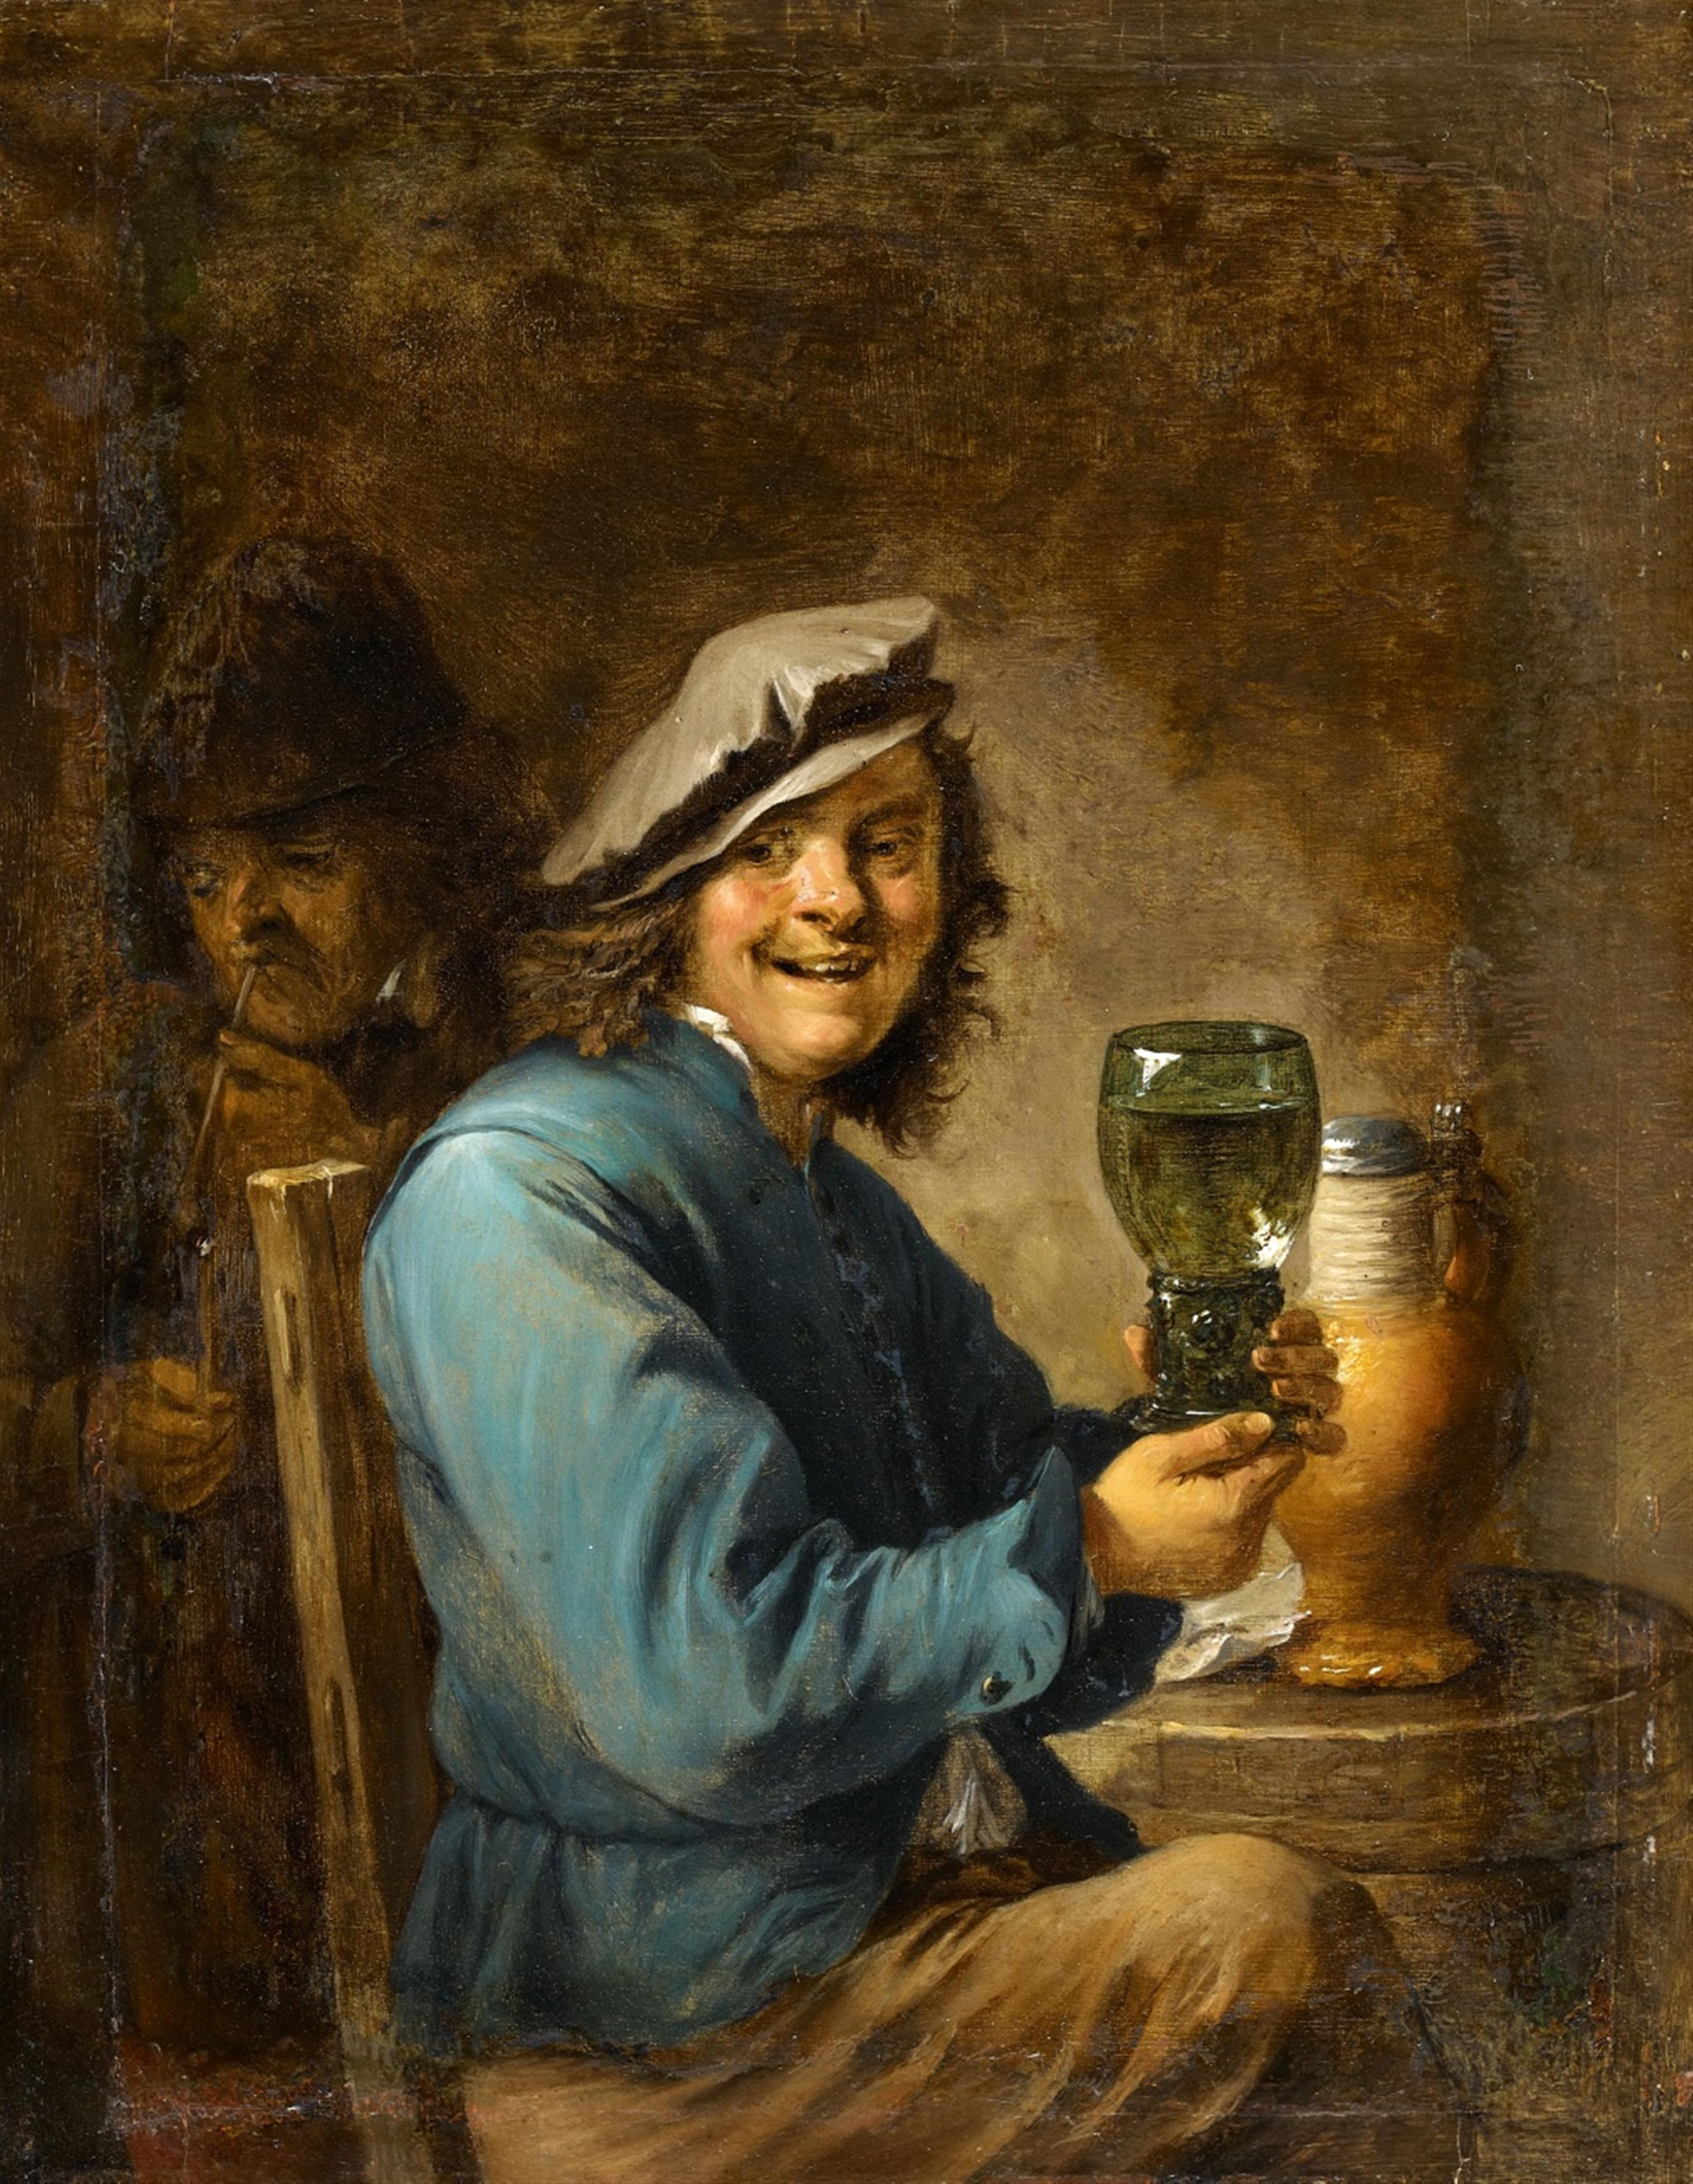 David Teniers the Younger - The Merry Drinker (Le Buveur Flamand) - image-1